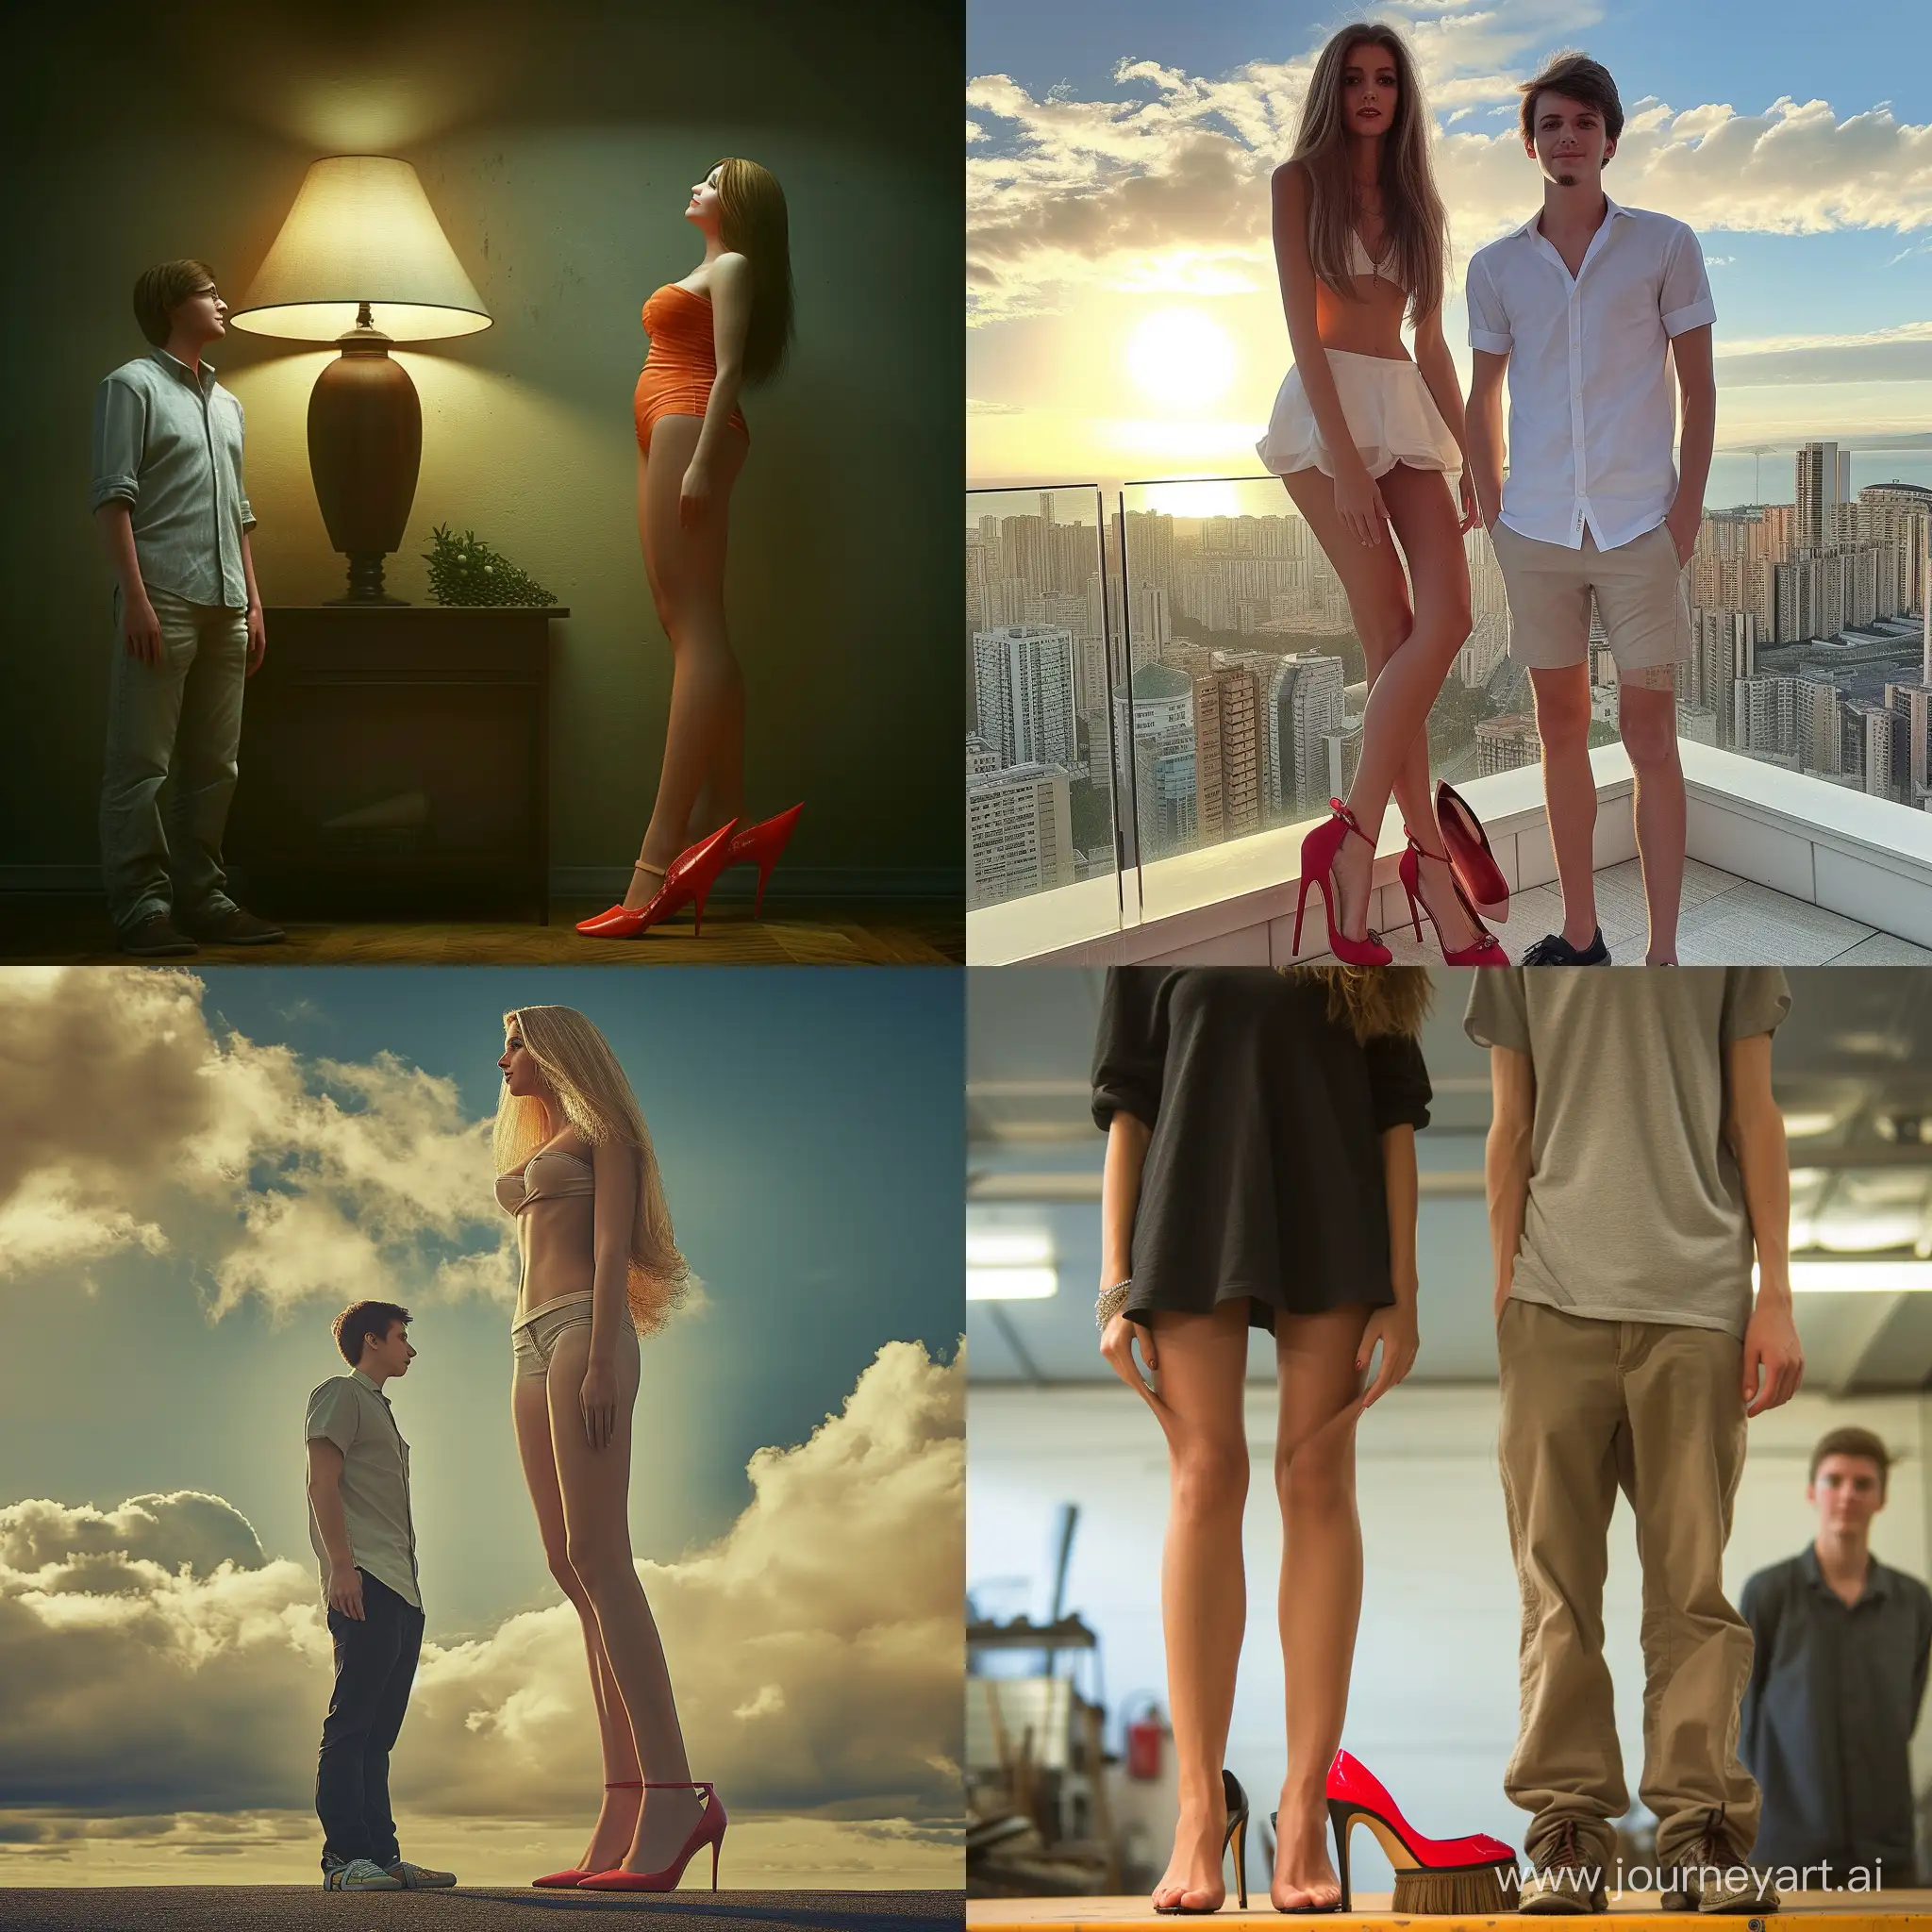 Create an image of a beautiful 500 feet tall woman wearing stilleto heels. Next to her gigantic heels is standing her normal sized boyfriend.